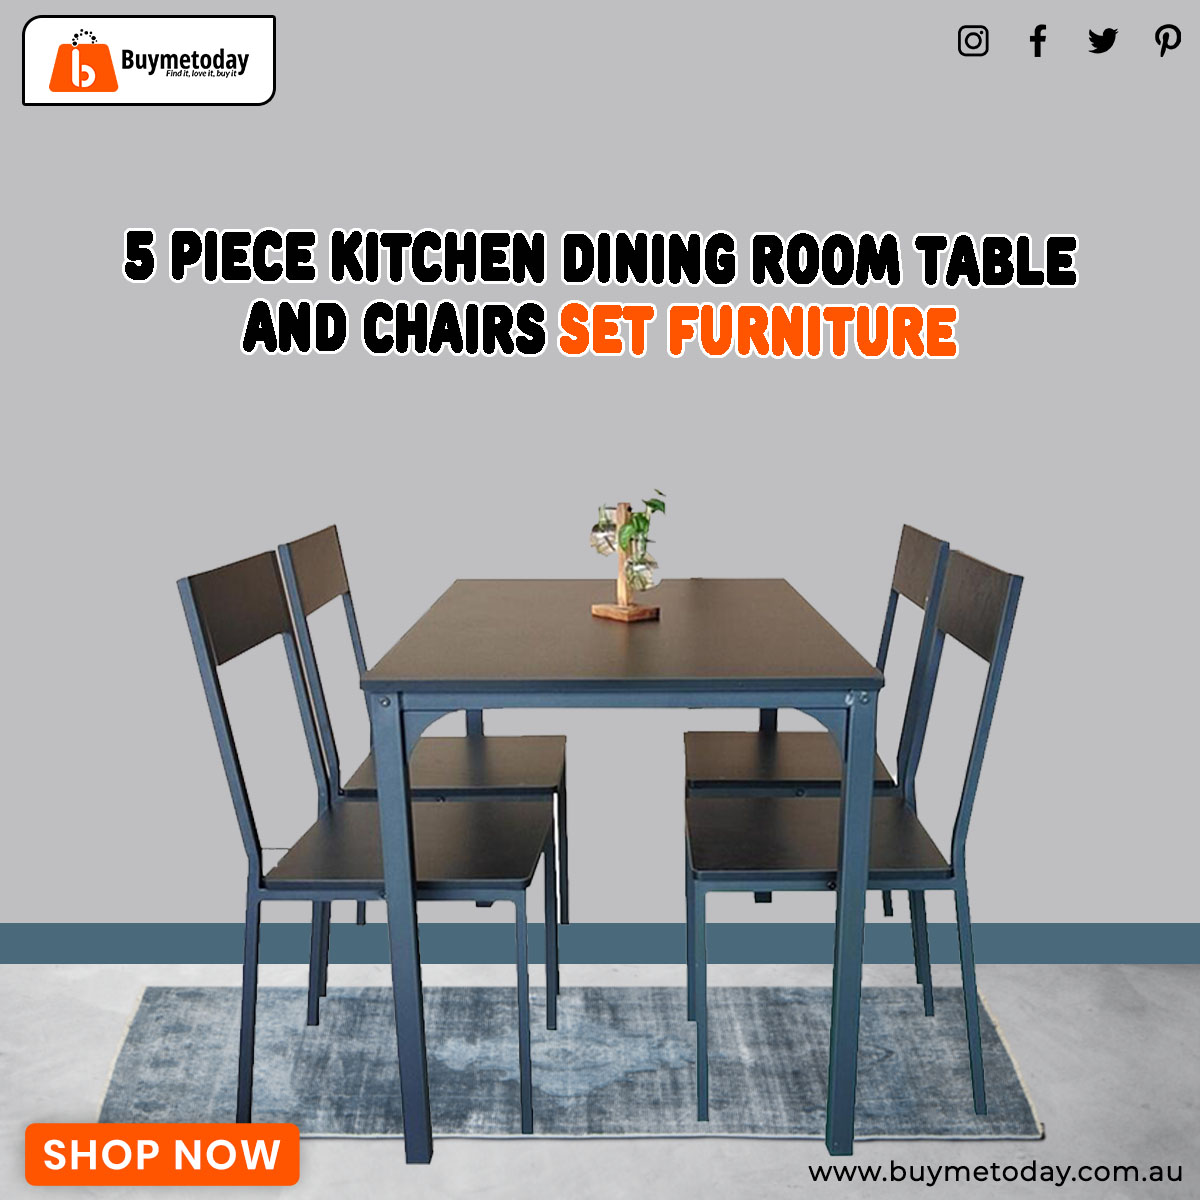 Complete Dining Delight: 5-Piece Kitchen Table and Chairs Set

SHOP NOW:-
tinyurl.com/2p9dj22c

Whether it's a casual family dinner or a special occasion, this set ensures a delightful dining experience for all. 

#furniture #diningtable #diningtableset #australia #buymetoday